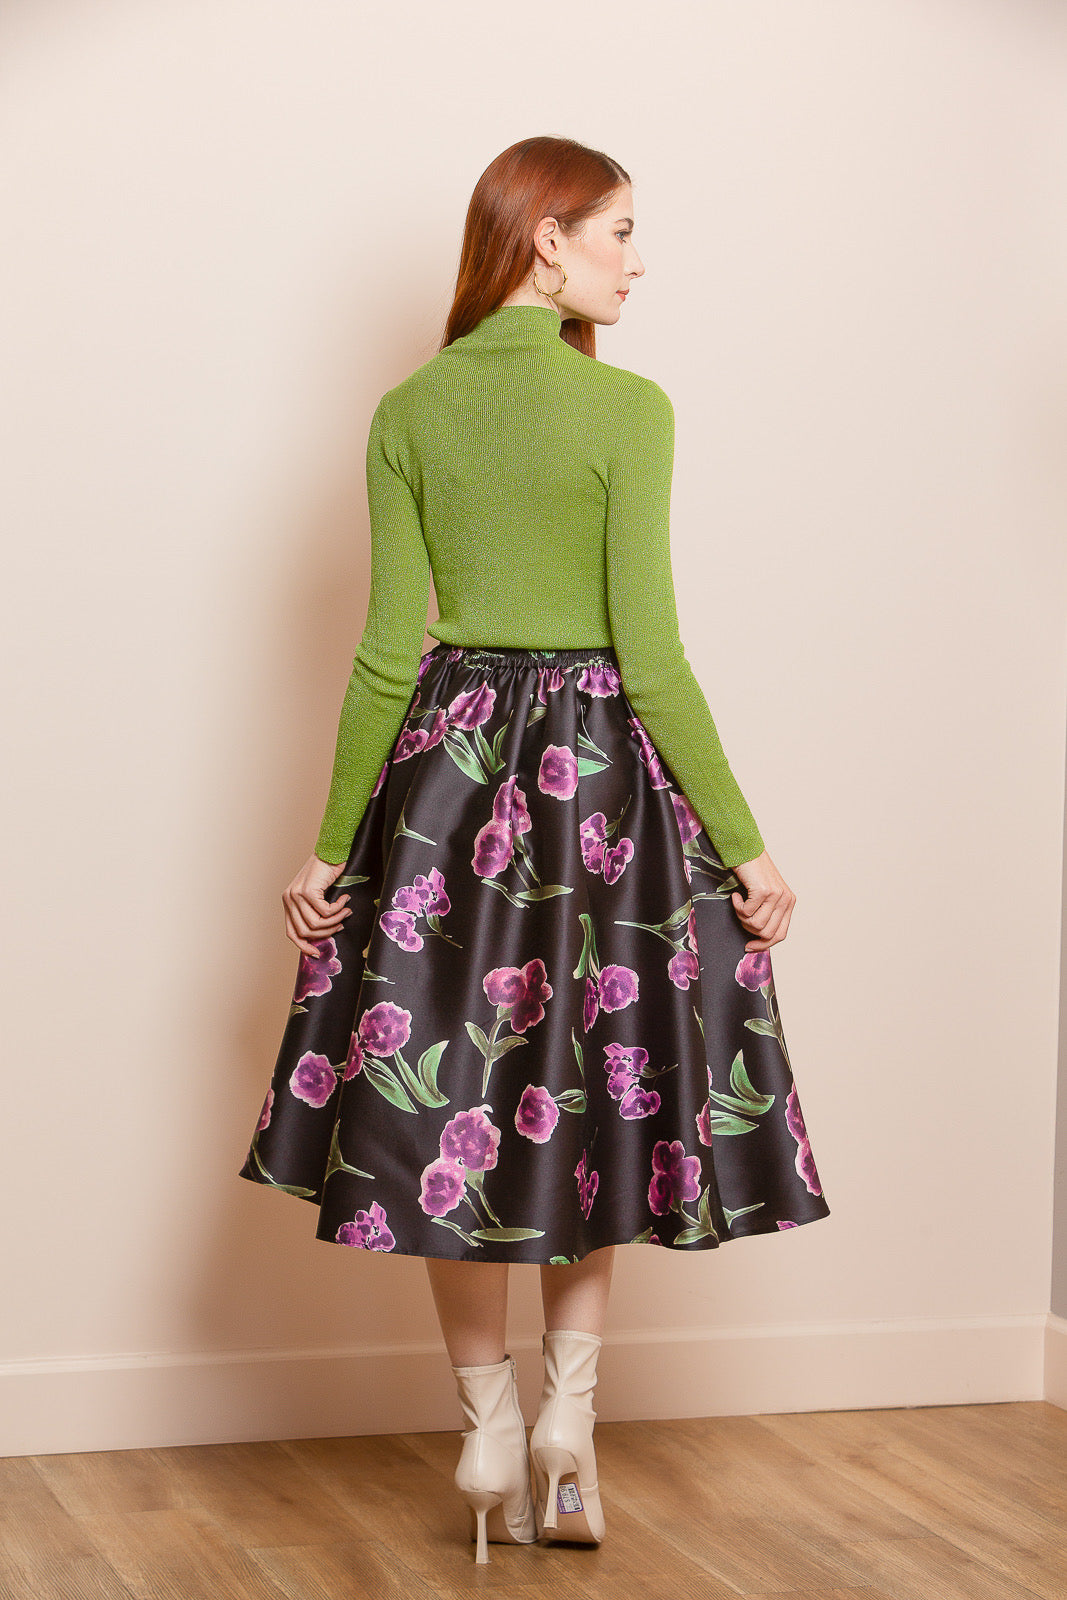 Rose Print A-Line Skirt With Elastic Waistband and Pockets